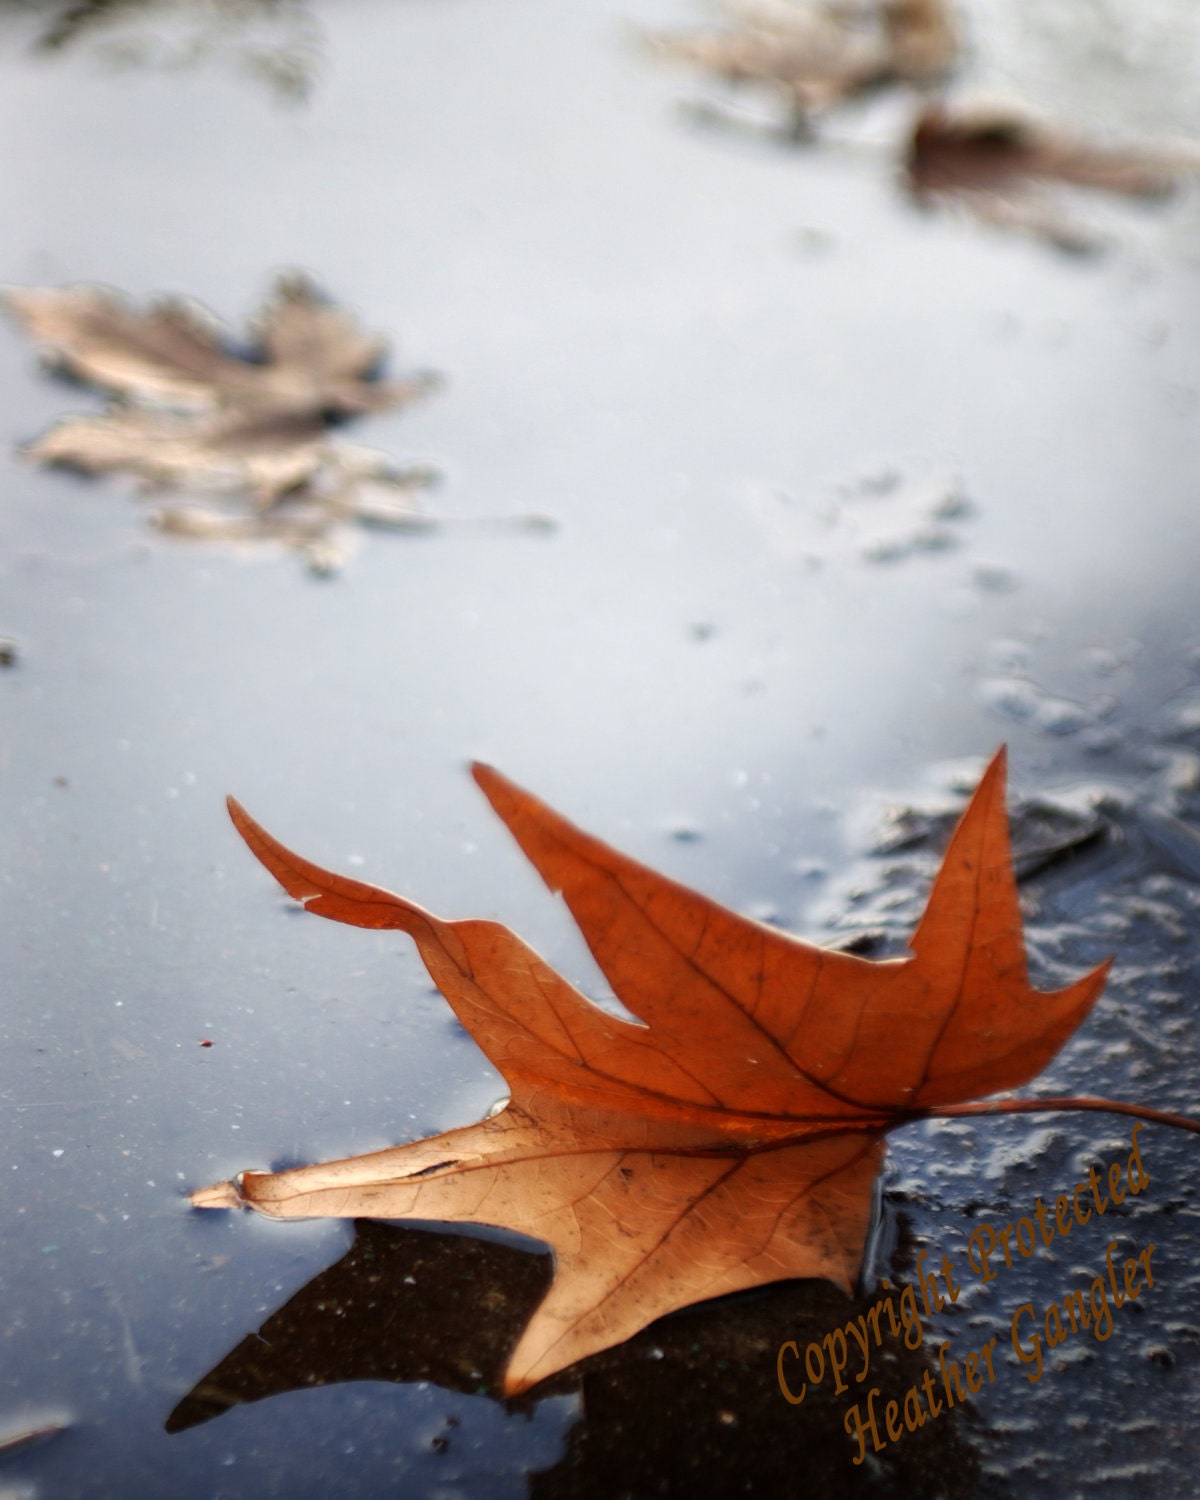 Fall Leaf  in Puddle Photo Art 8x12 Print - itspicturesque